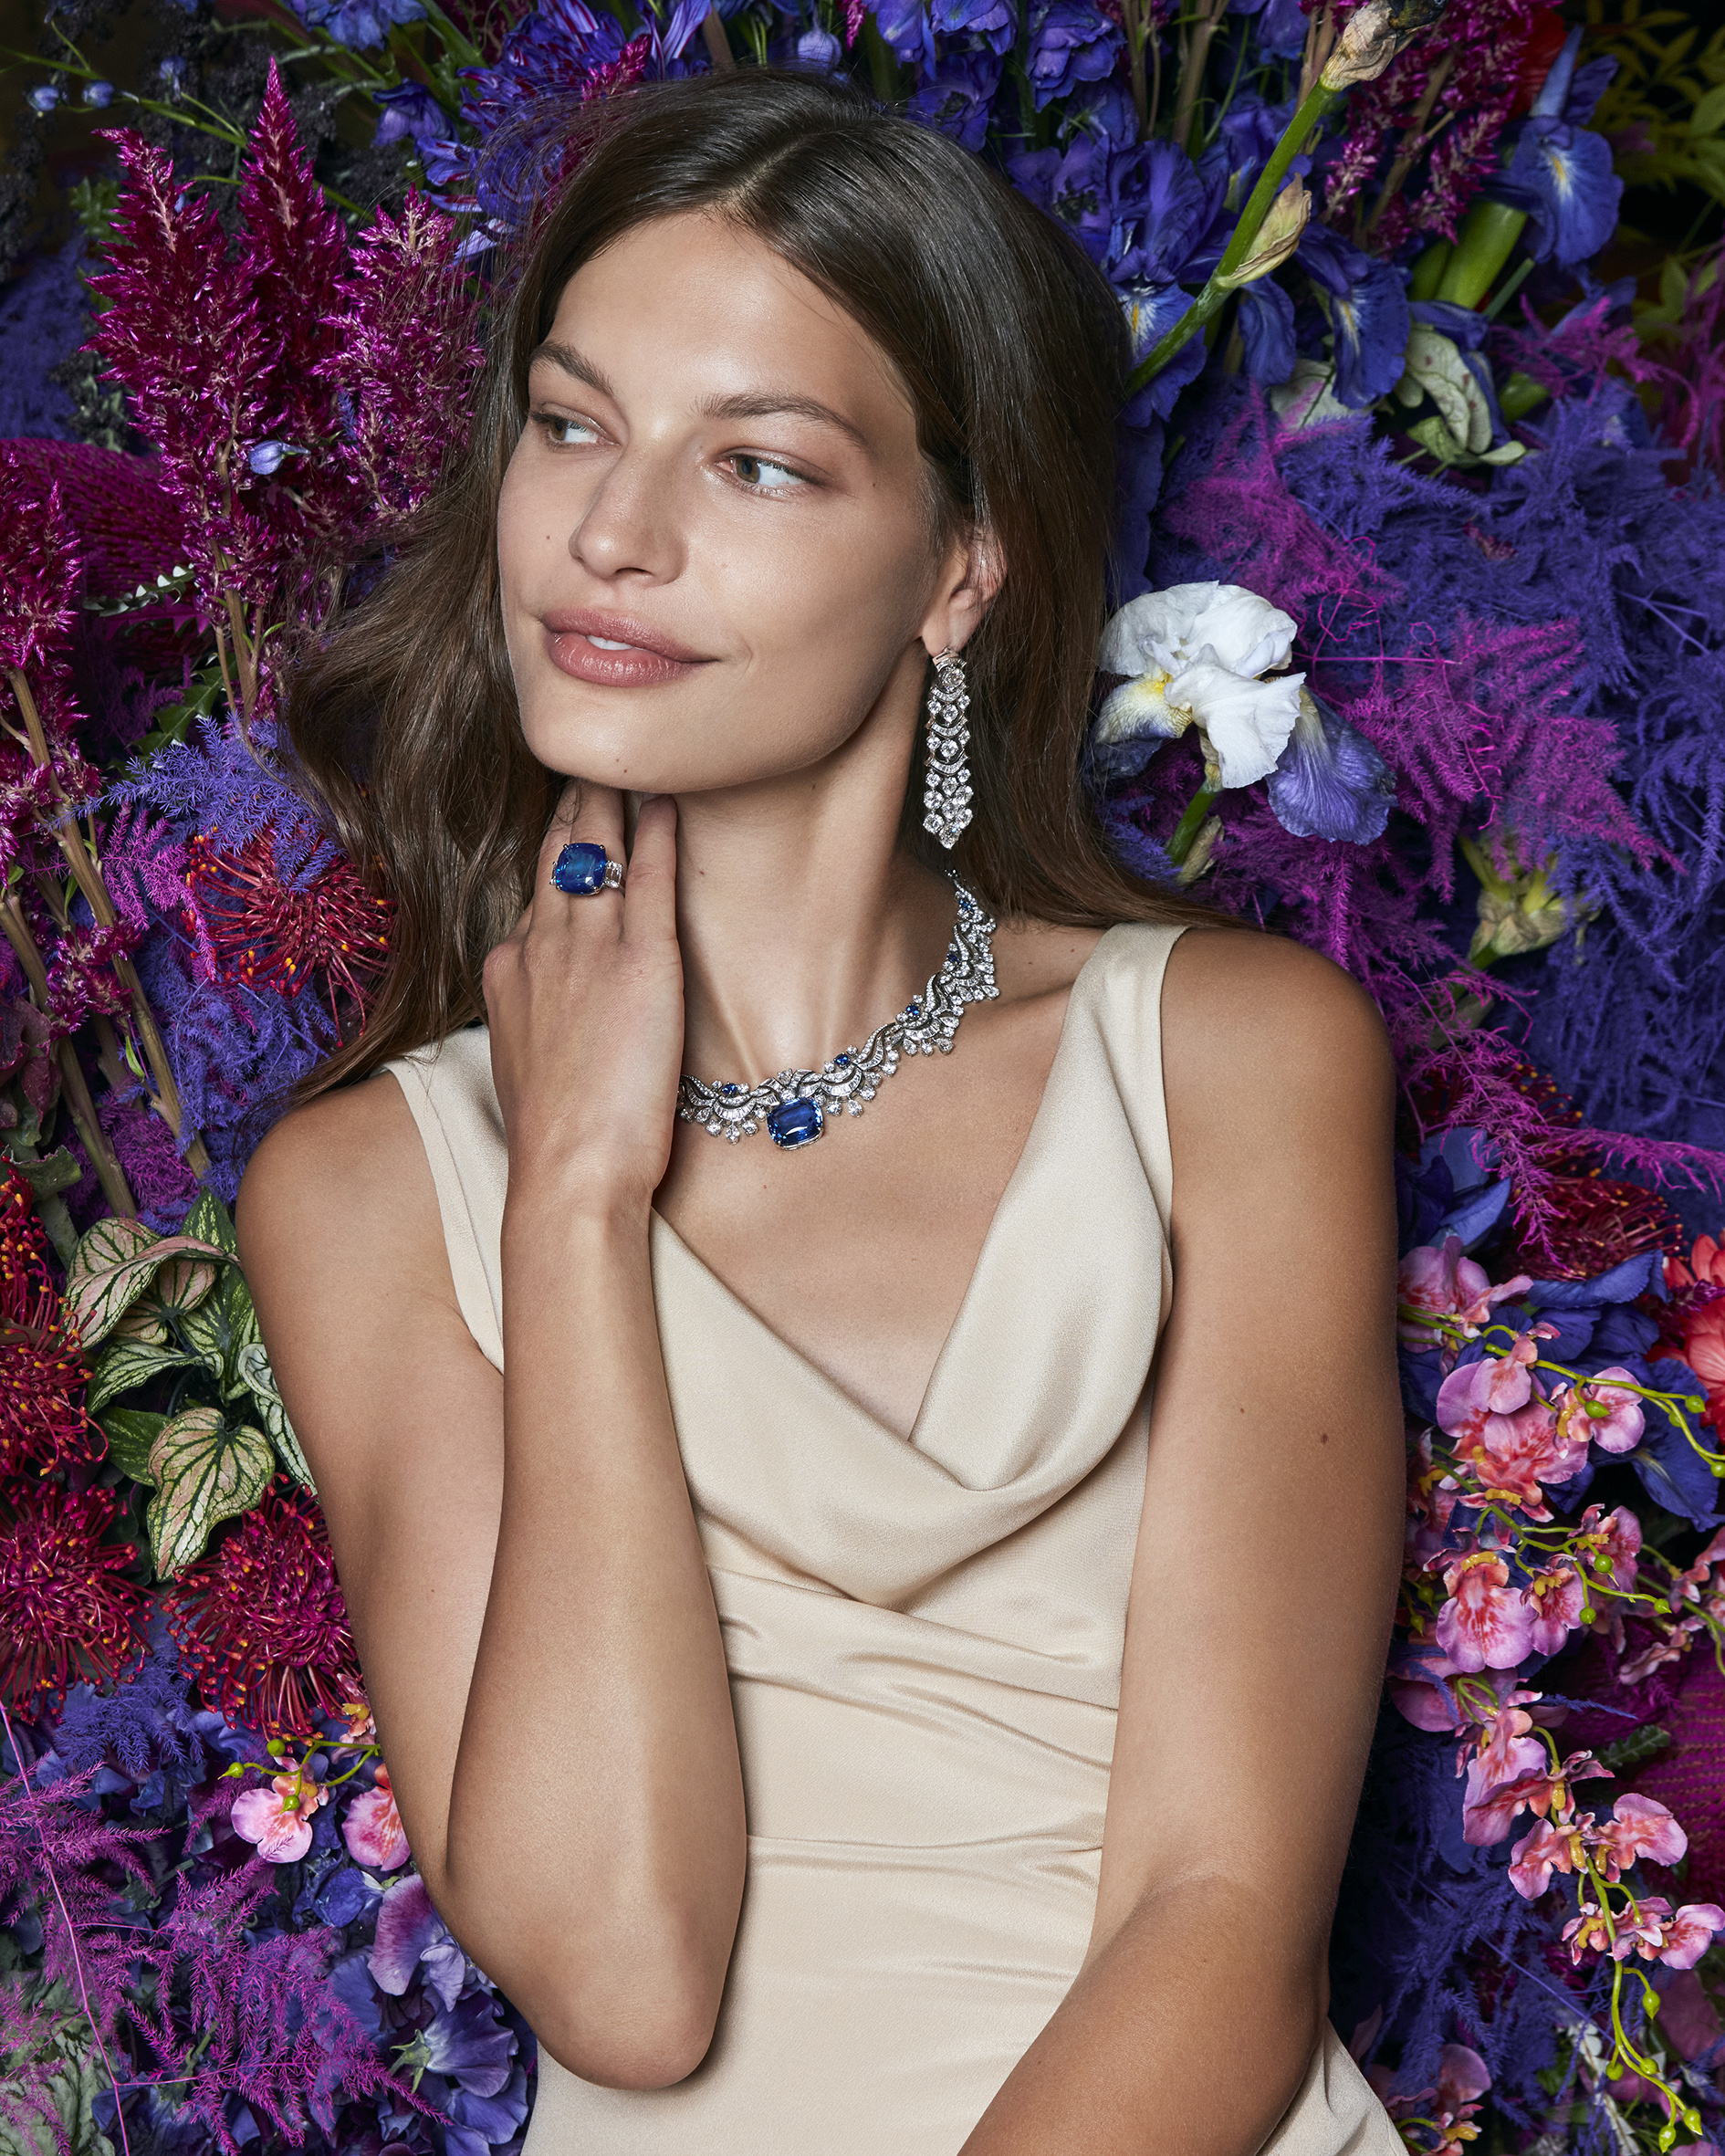 Bulgari on X: Debuting in style in a phenomenal event in Paris, the new  Bulgari #EdenTheGardenofWonders High Jewelry collection features pieces  like the magnificent Ocean Wave necklace — forged with a stunning